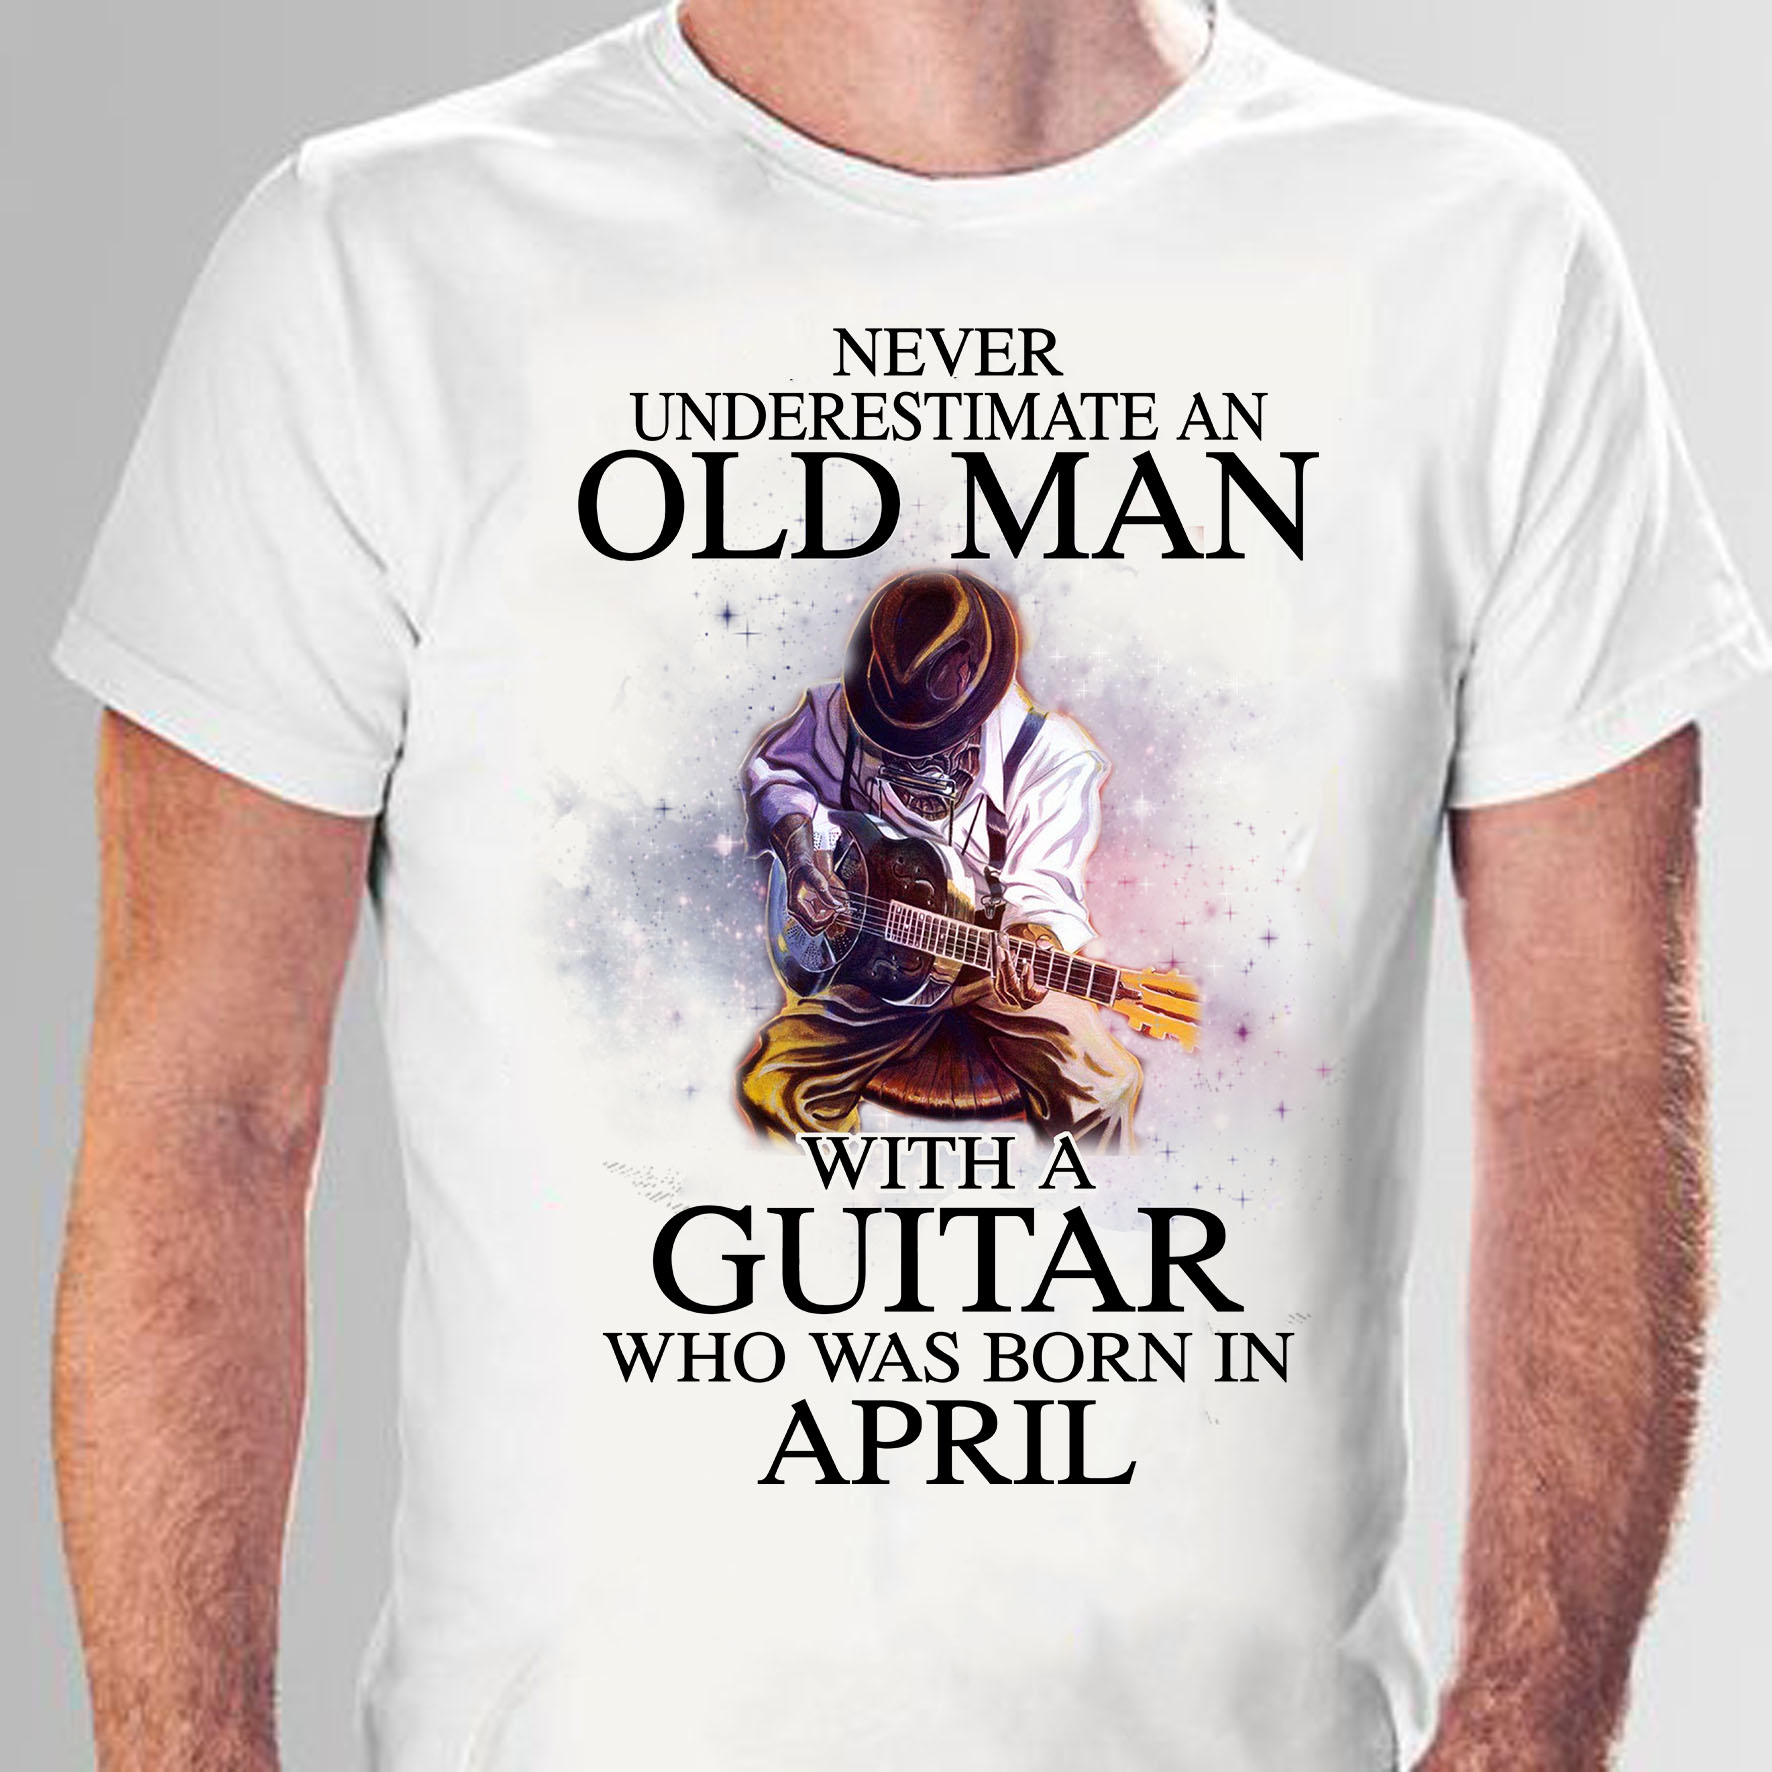 Never underestimate an old man with a guitar who was born in April - Guitarist